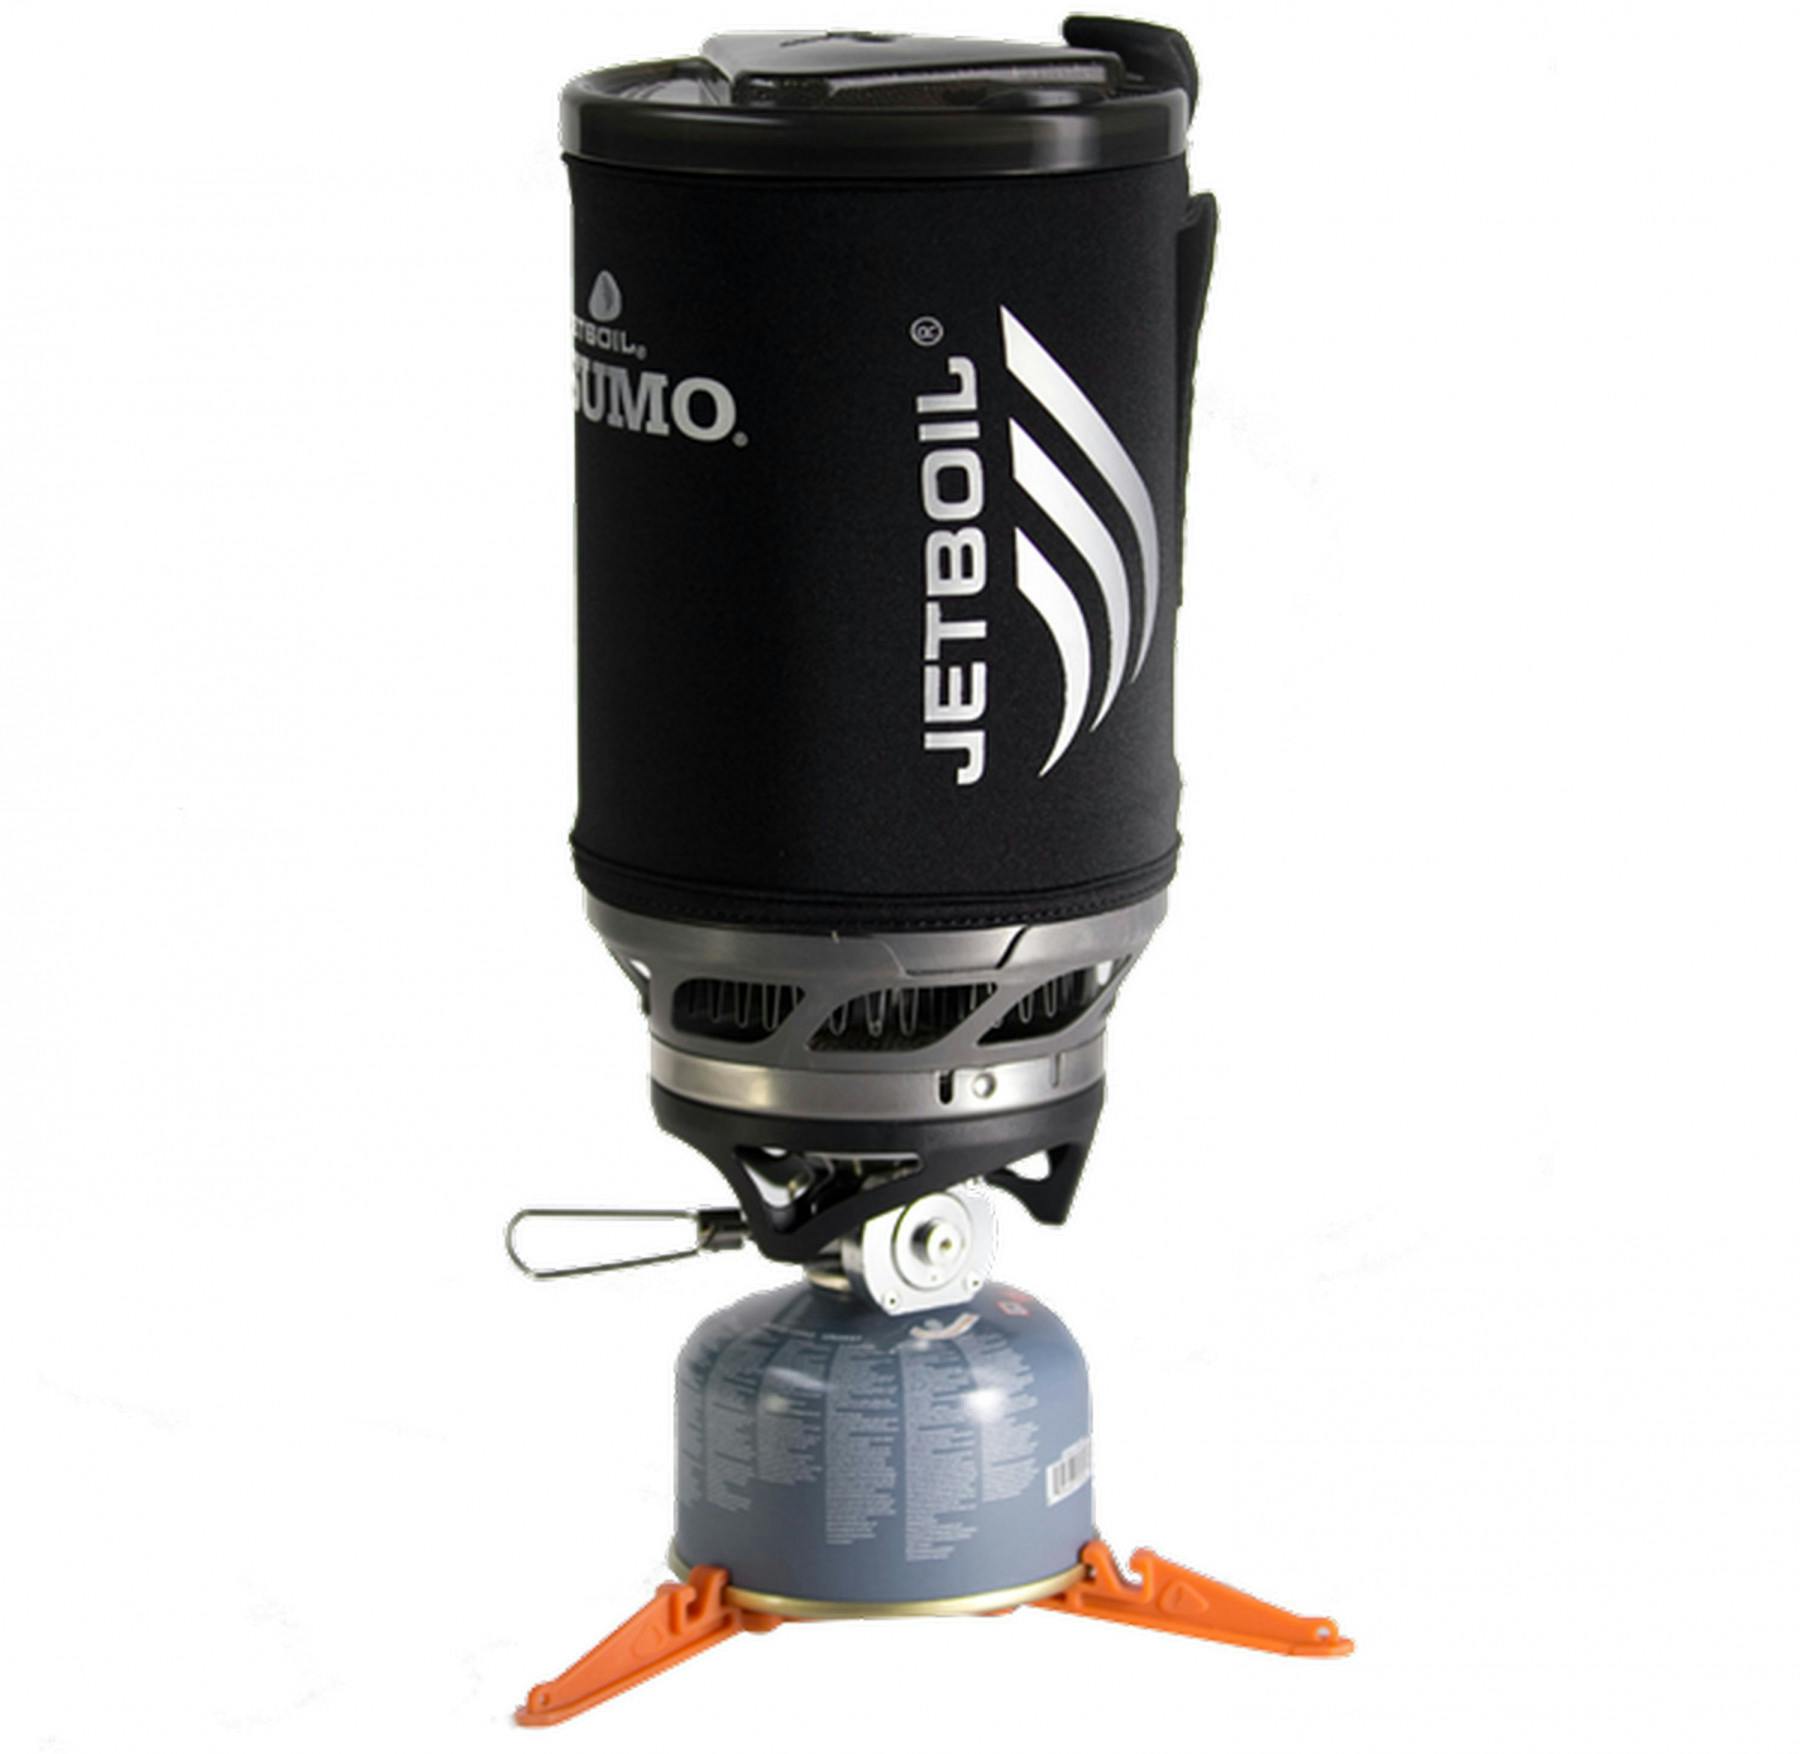 Jetboil - Sumo Stove System - Carbon